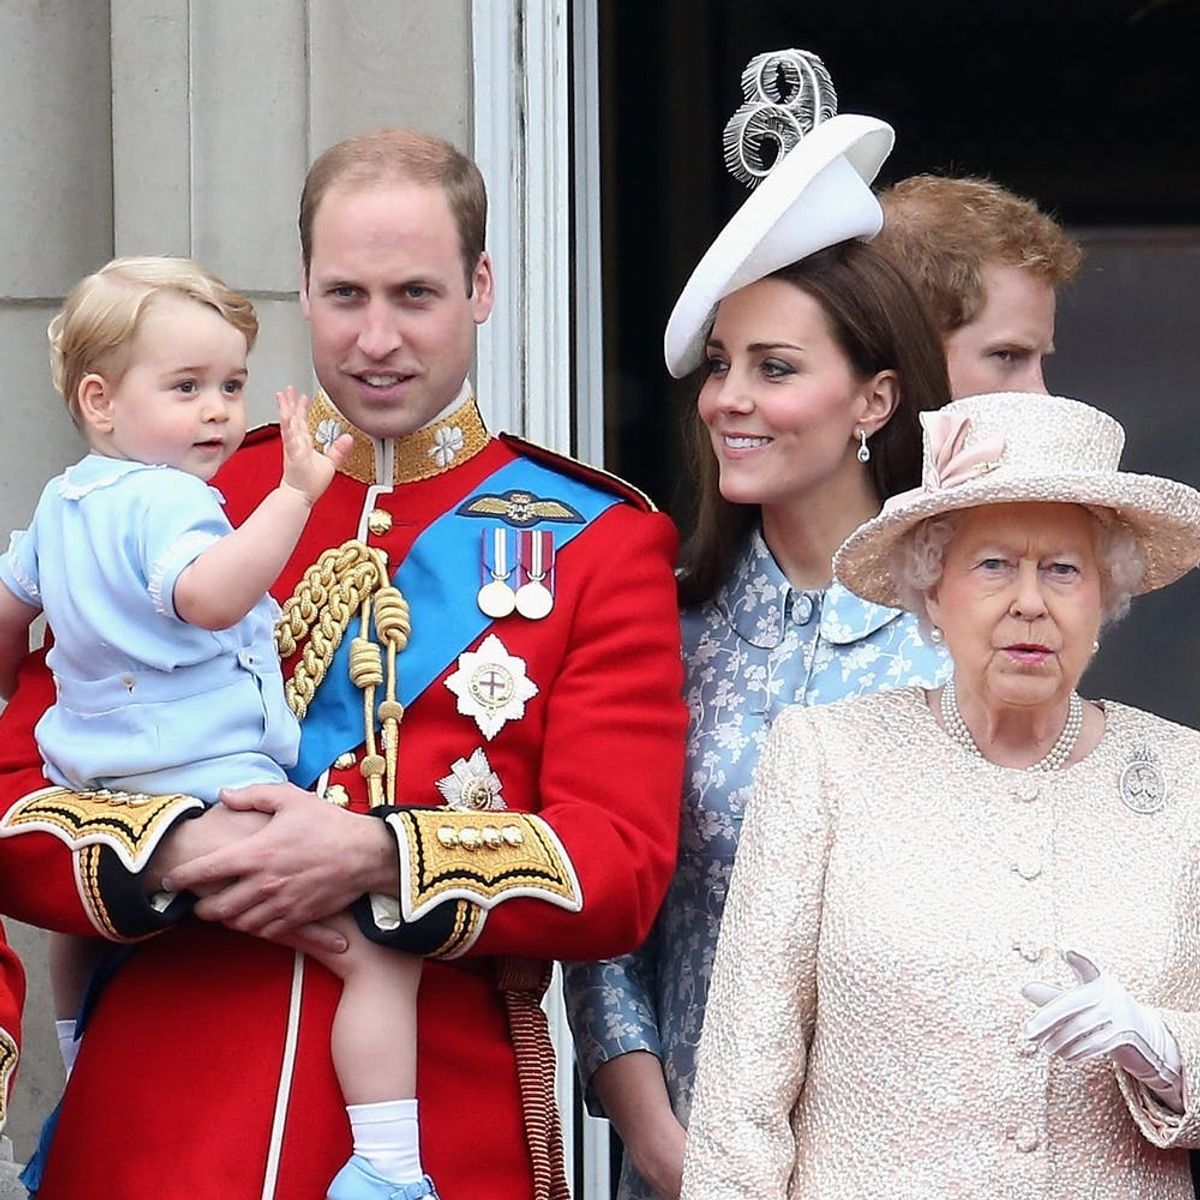 The Entire Royal Family Has Been Banned from Eating *This* One Food